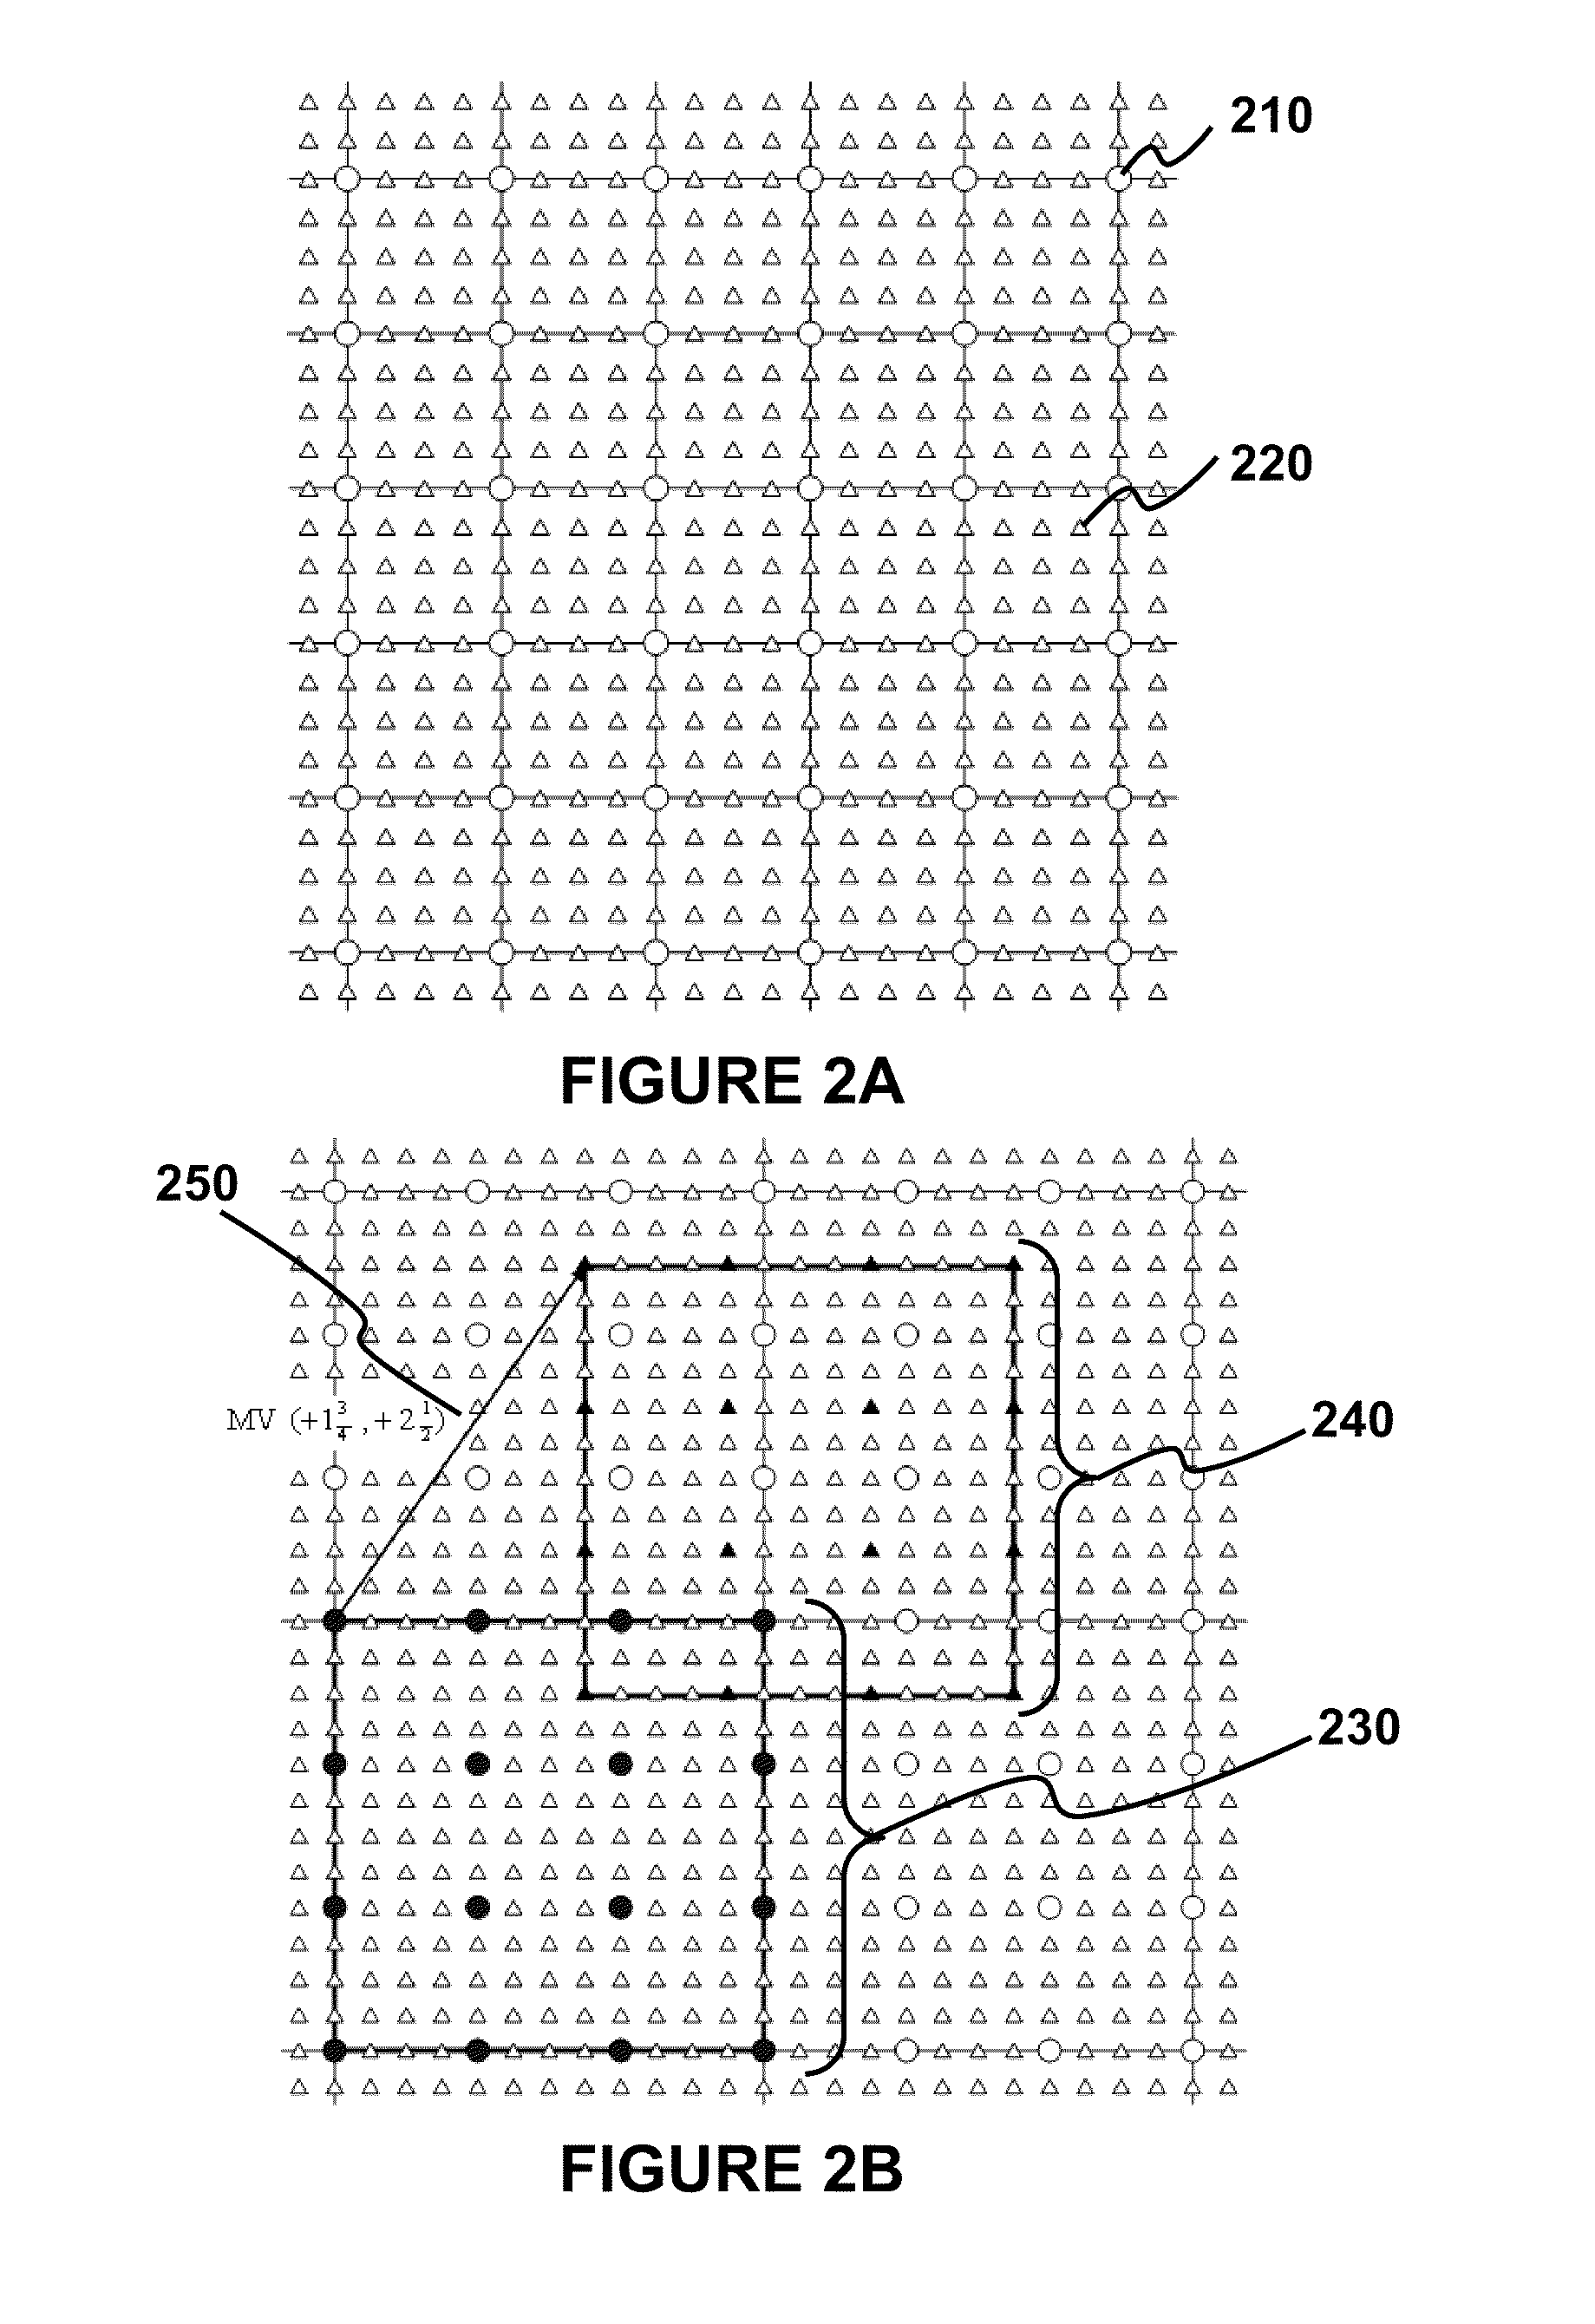 Method and apparatus for zoom motion estimation